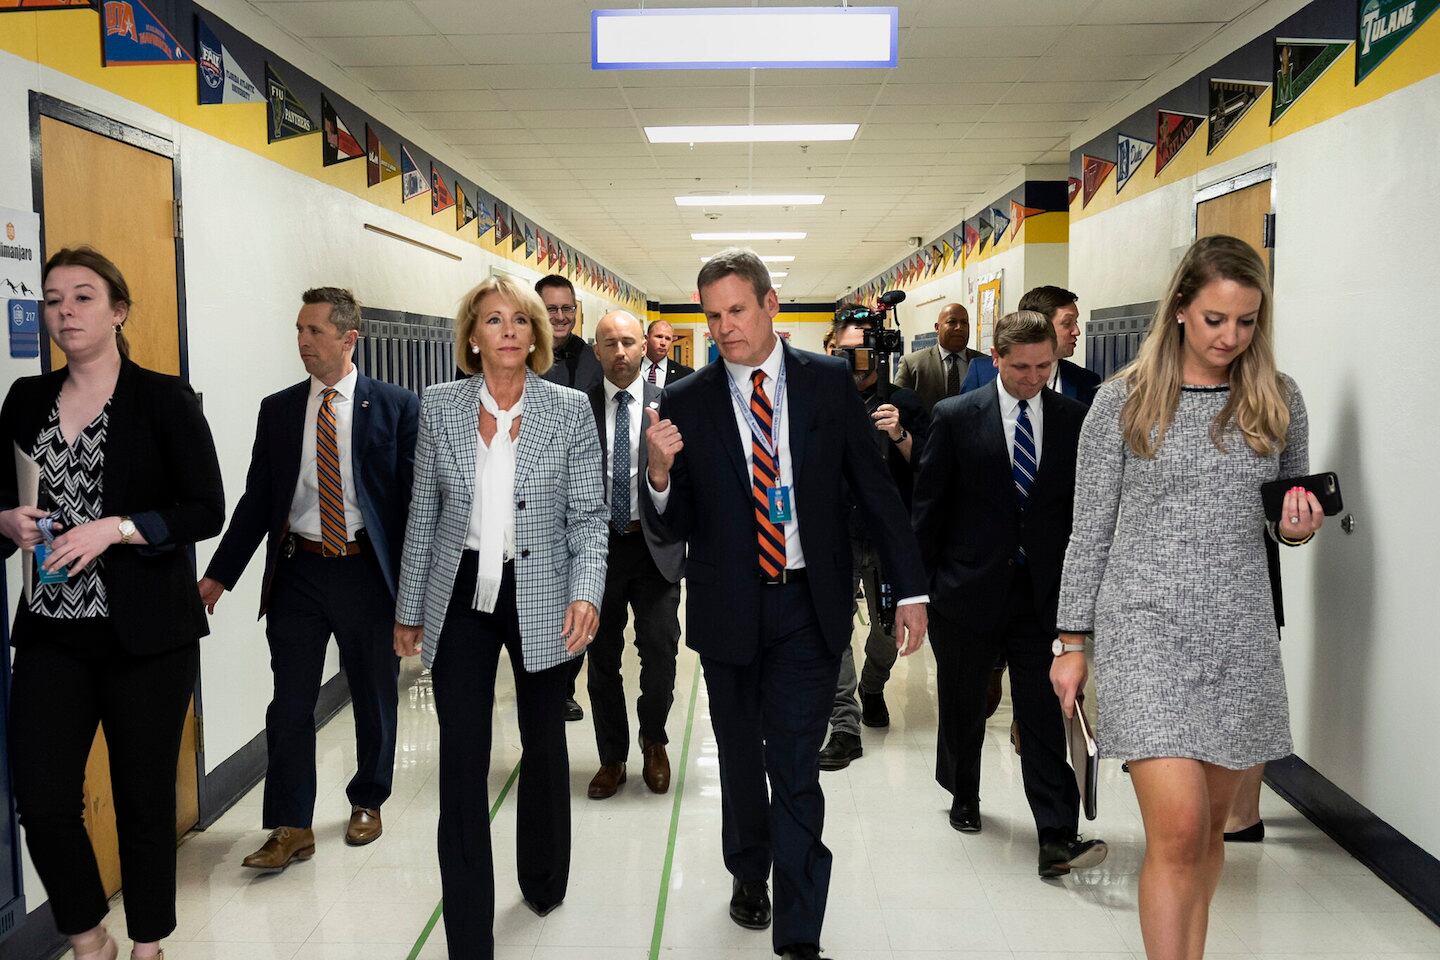 Gov. Bill Lee tours a Nashville charter school with U.S. Secretary of Education Betsy DeVos, who is also a charter school advocate and philanthropist.